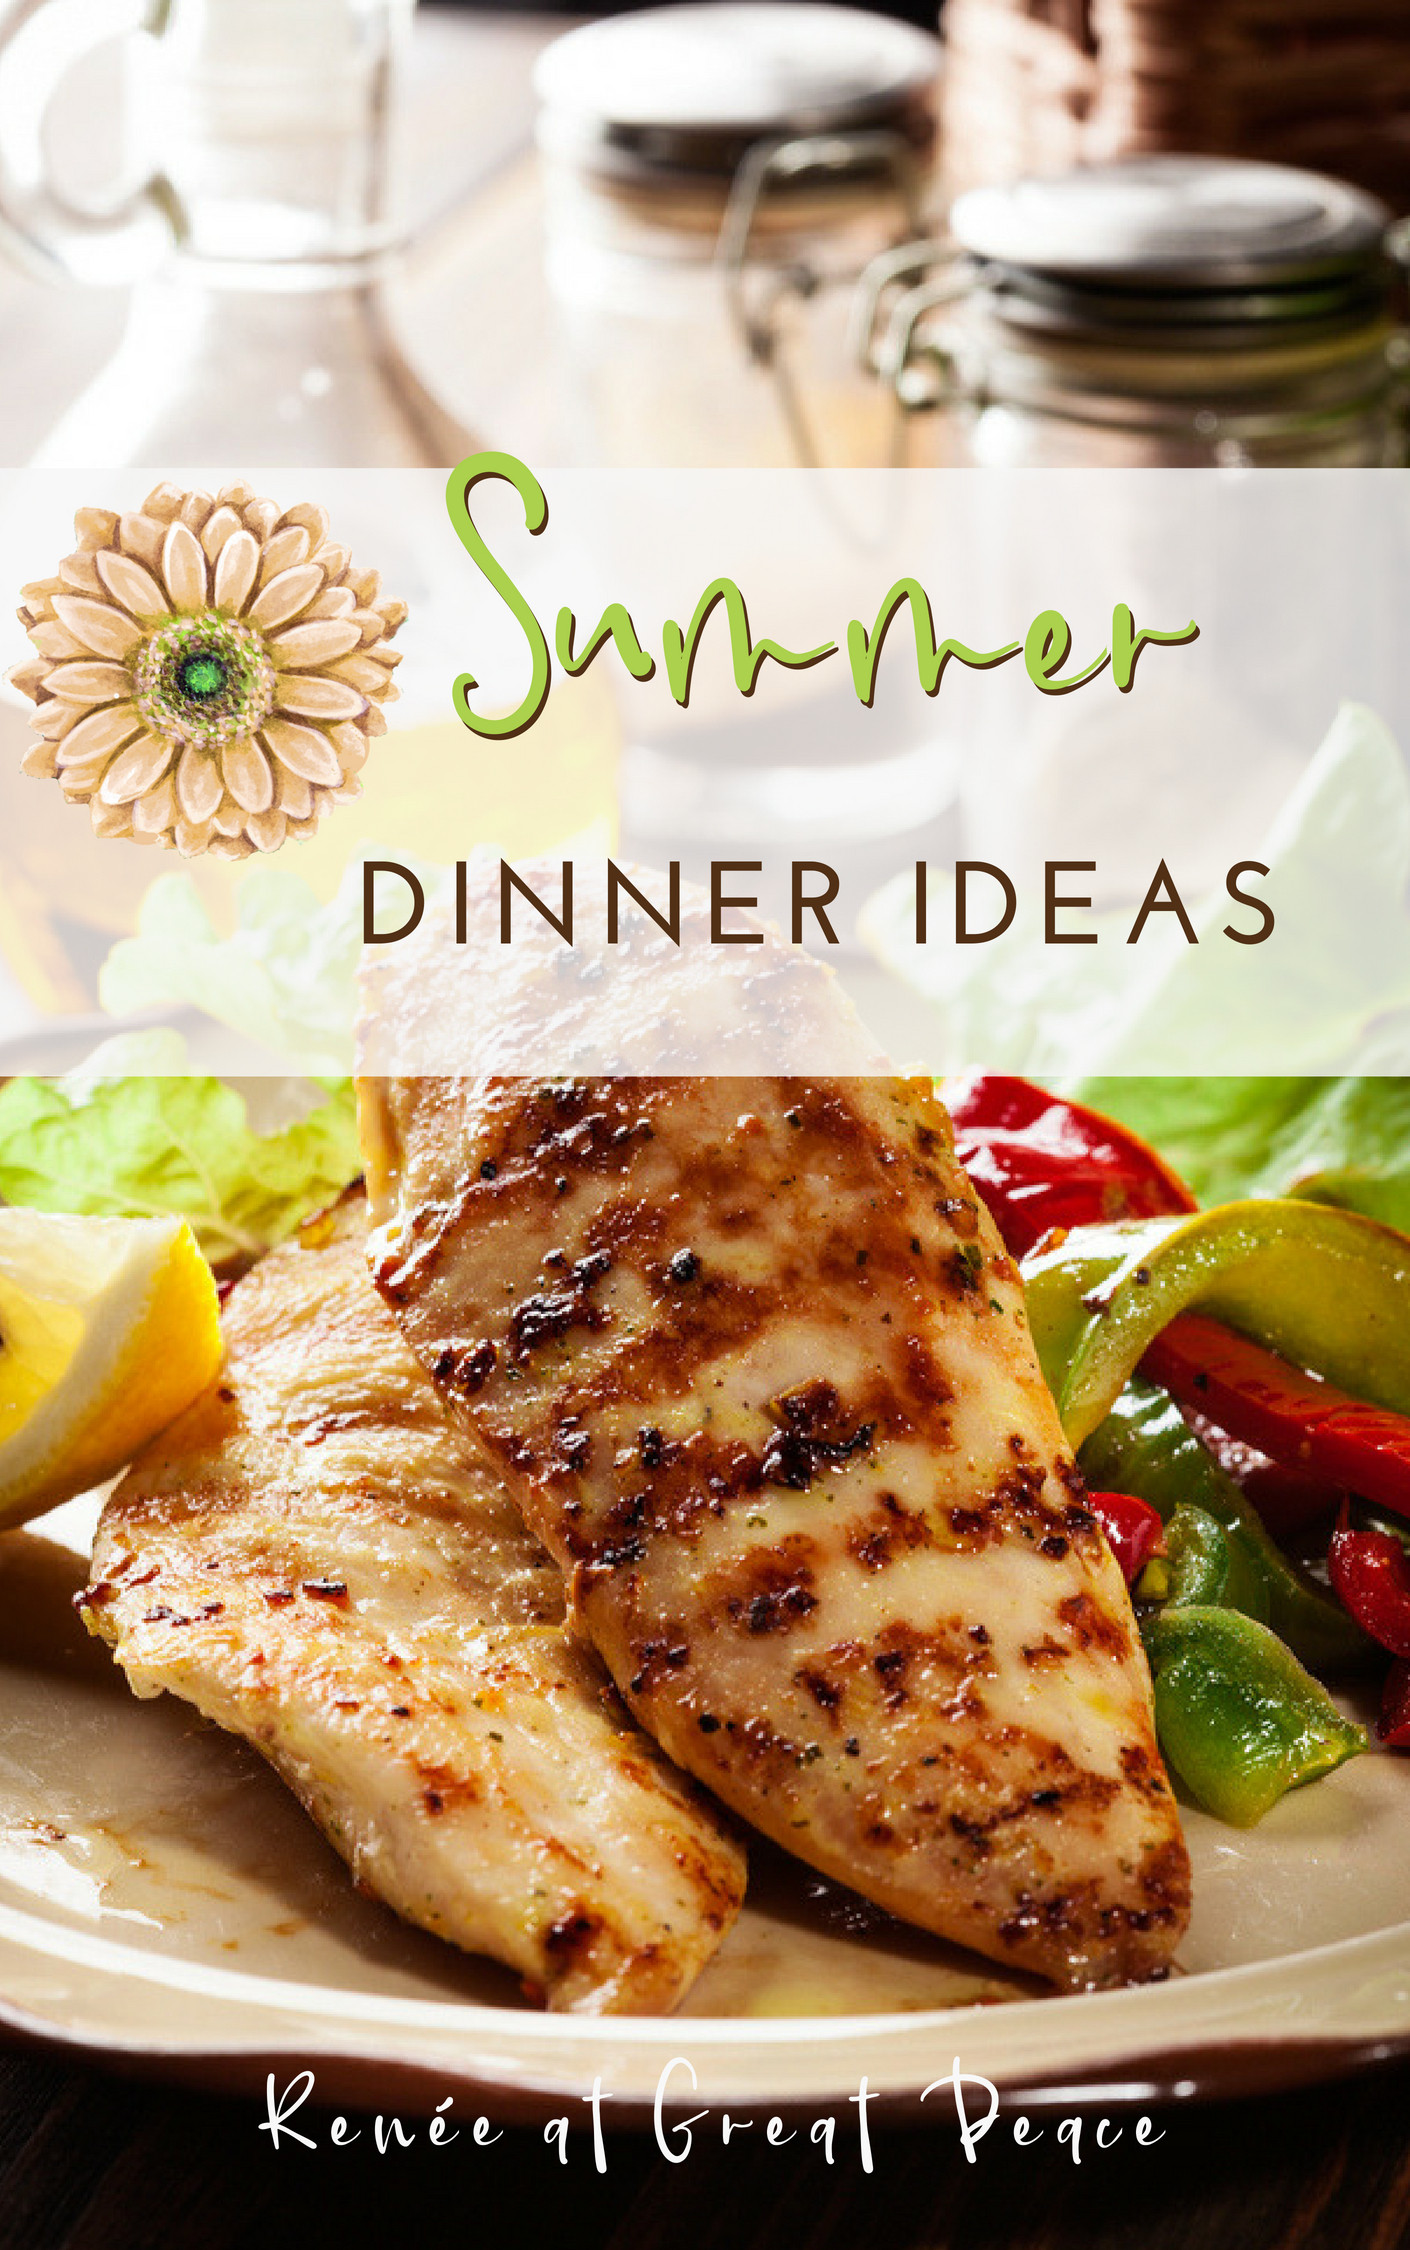 Cool Dinner Ideas
 Summer Dinner Ideas the Family Will Love Renée at Great